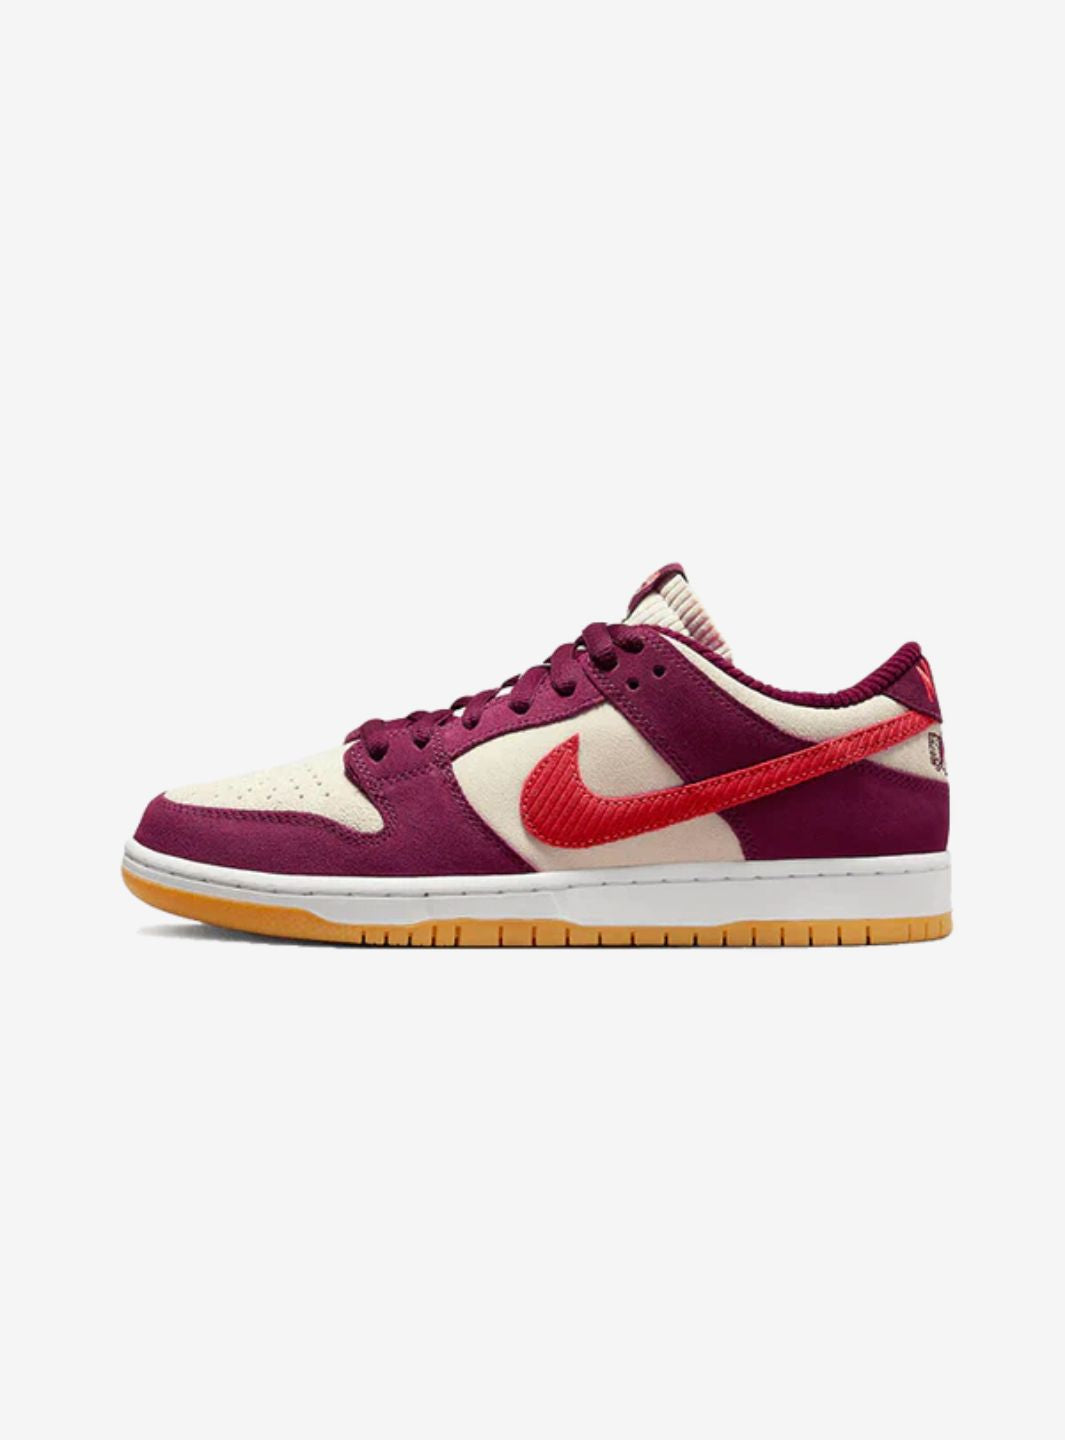 Nike SB Dunk Low Skate Like a Girl - DX4589-600 | ResellZone